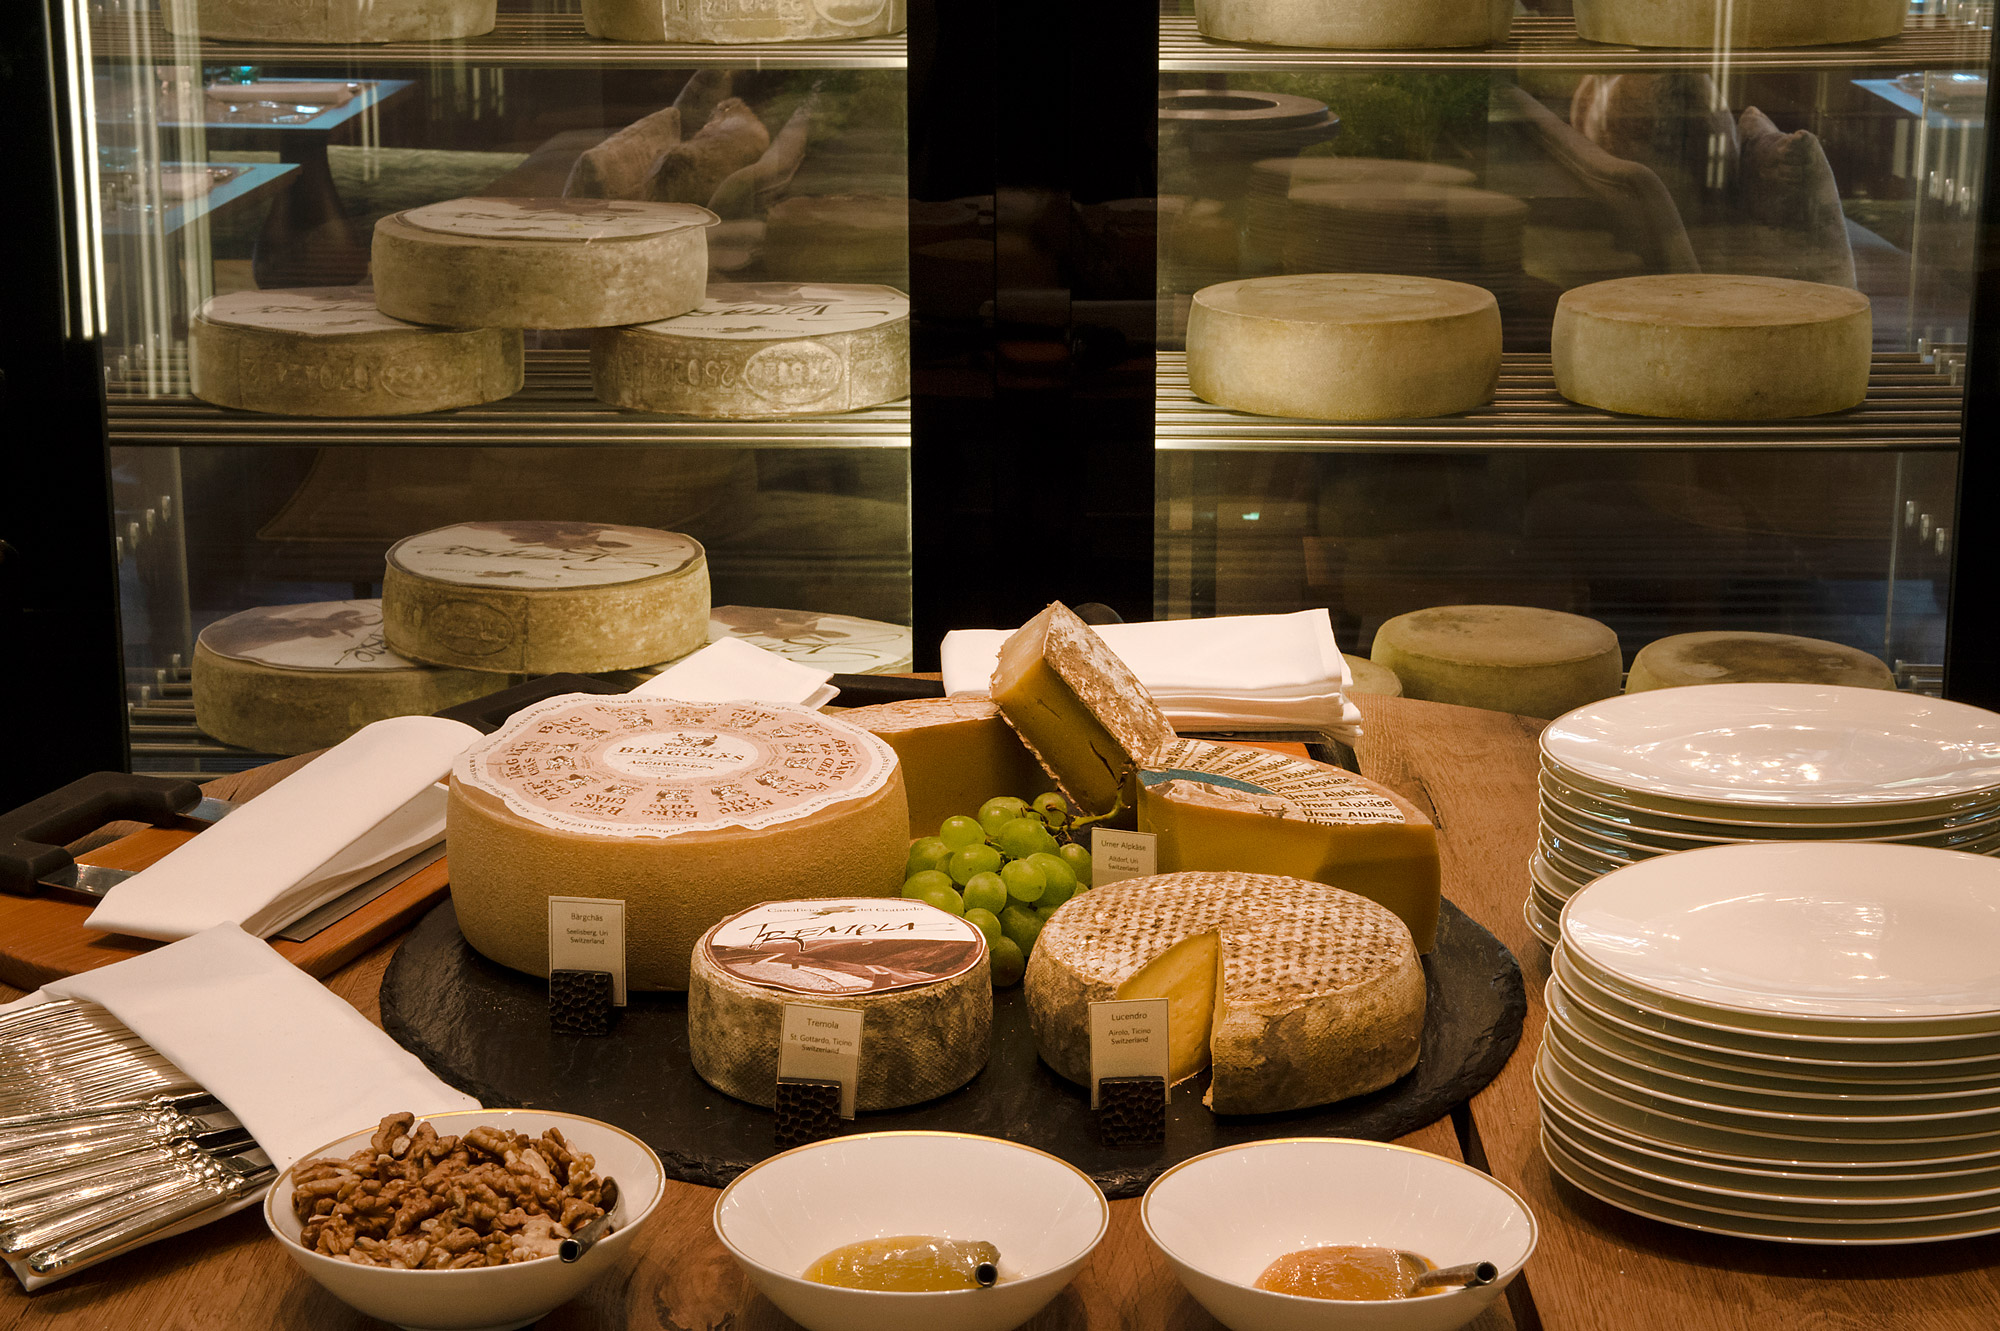 A spread of Swiss cheeses accompanied by grapes and plates